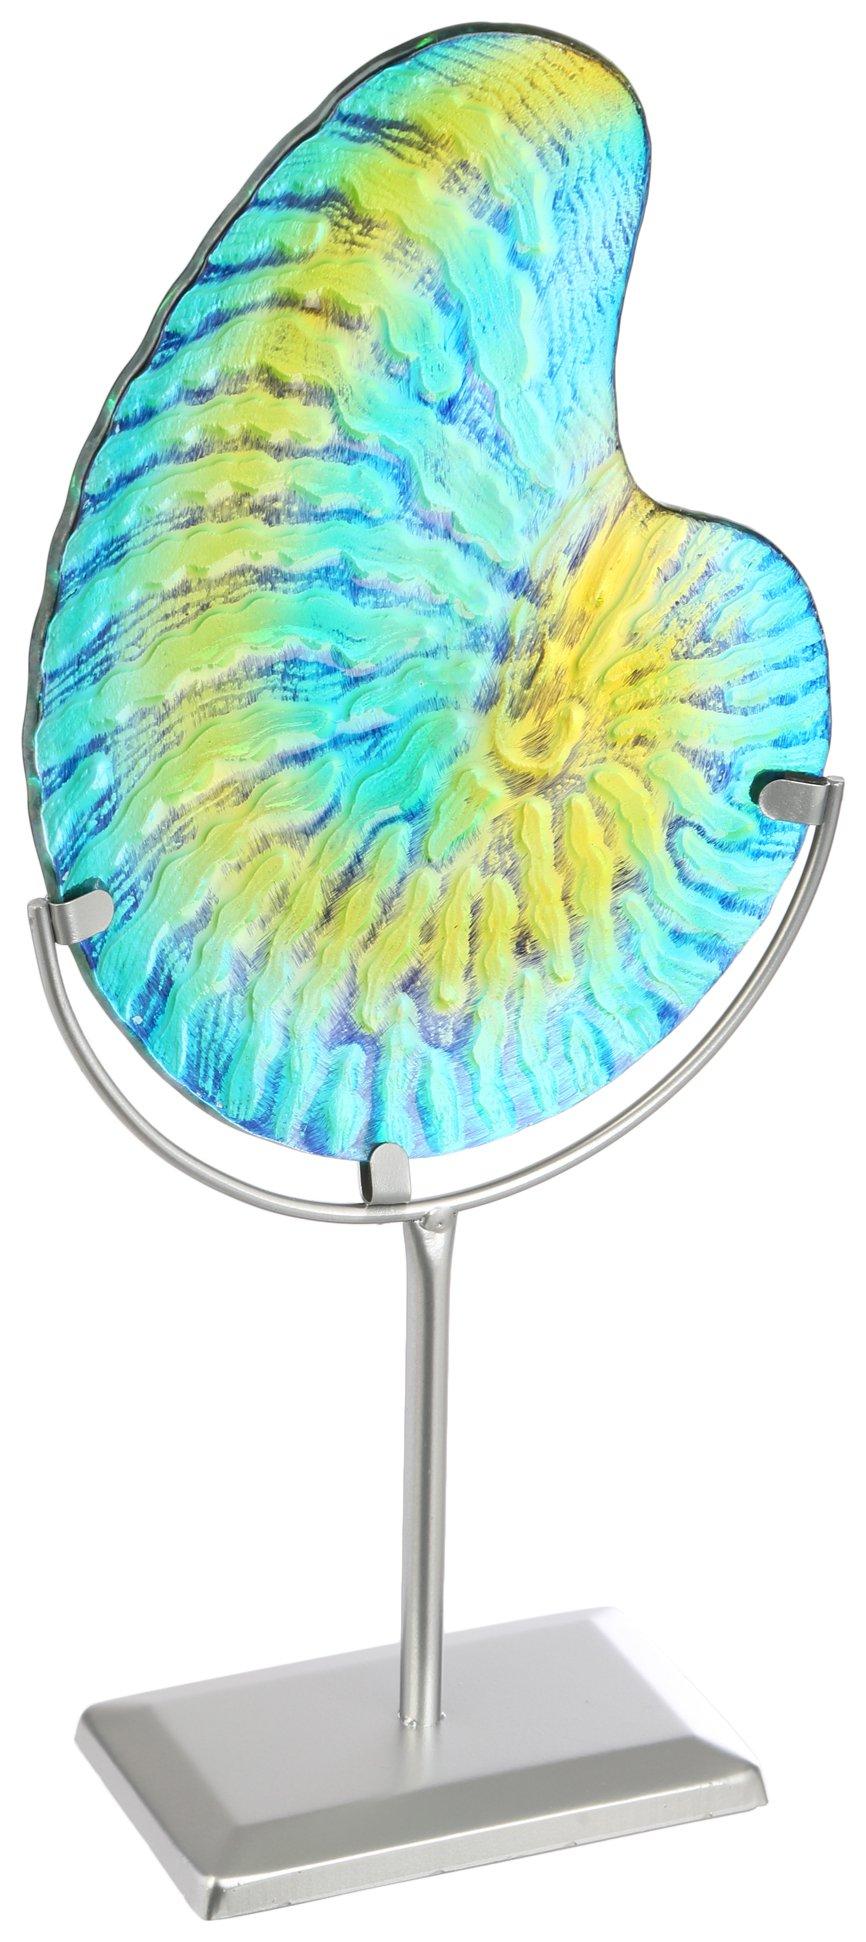 17in Table Top Glass Shell Decor